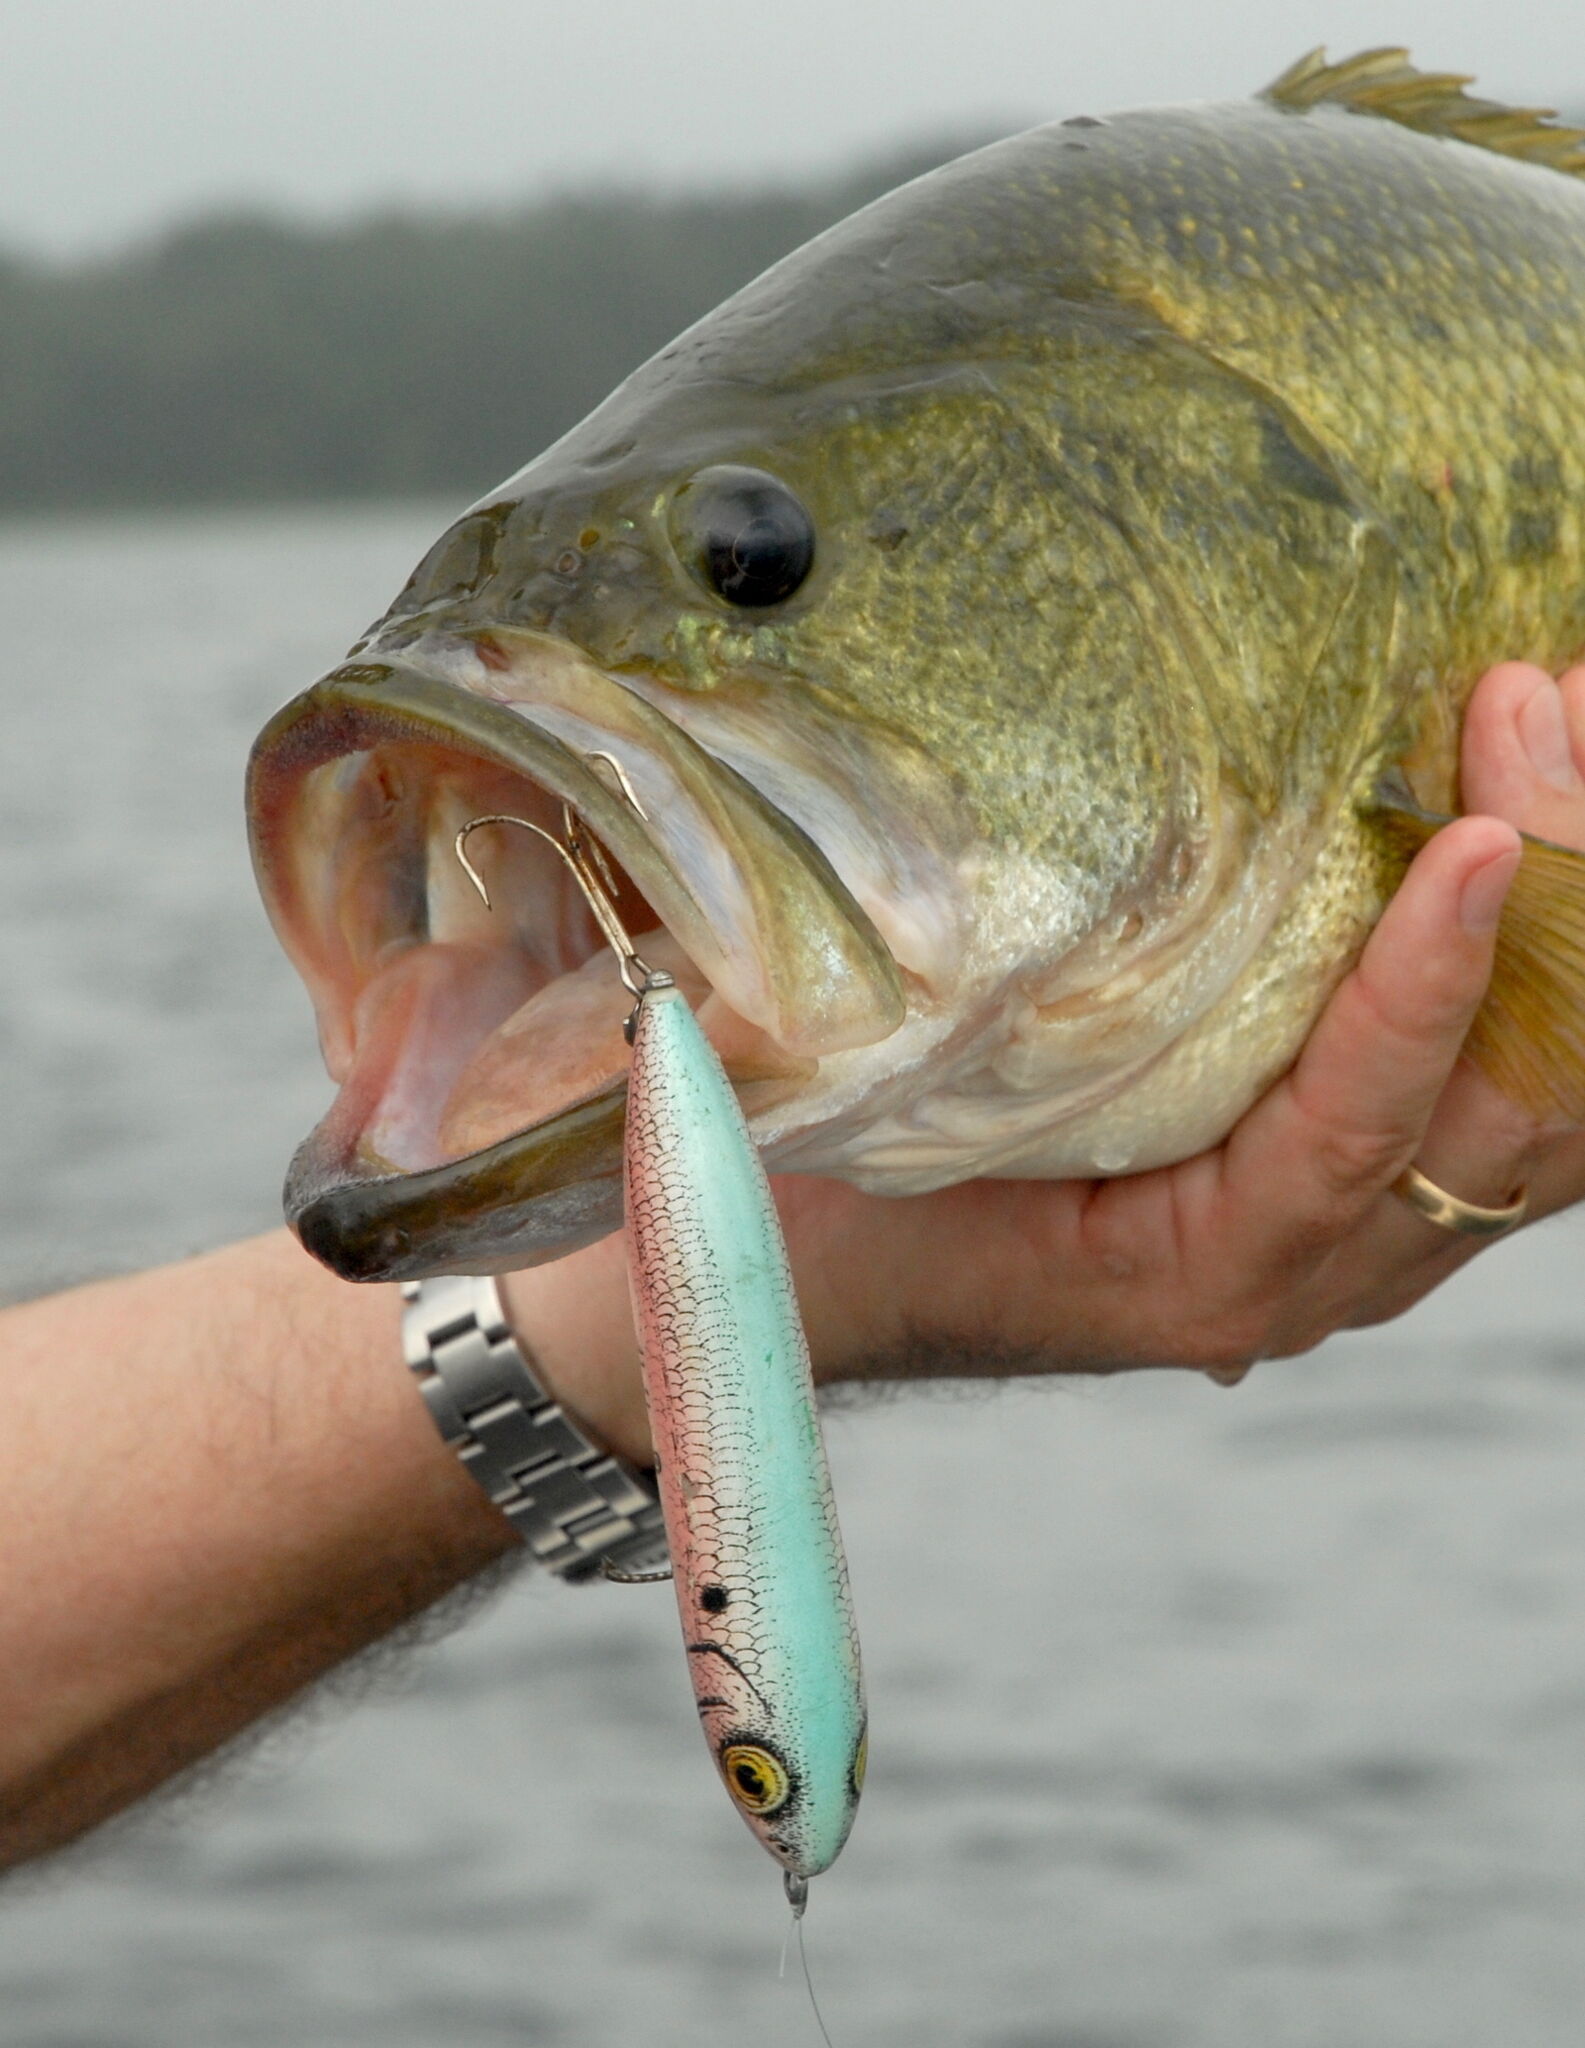 A crash course on going after school bass in the summer